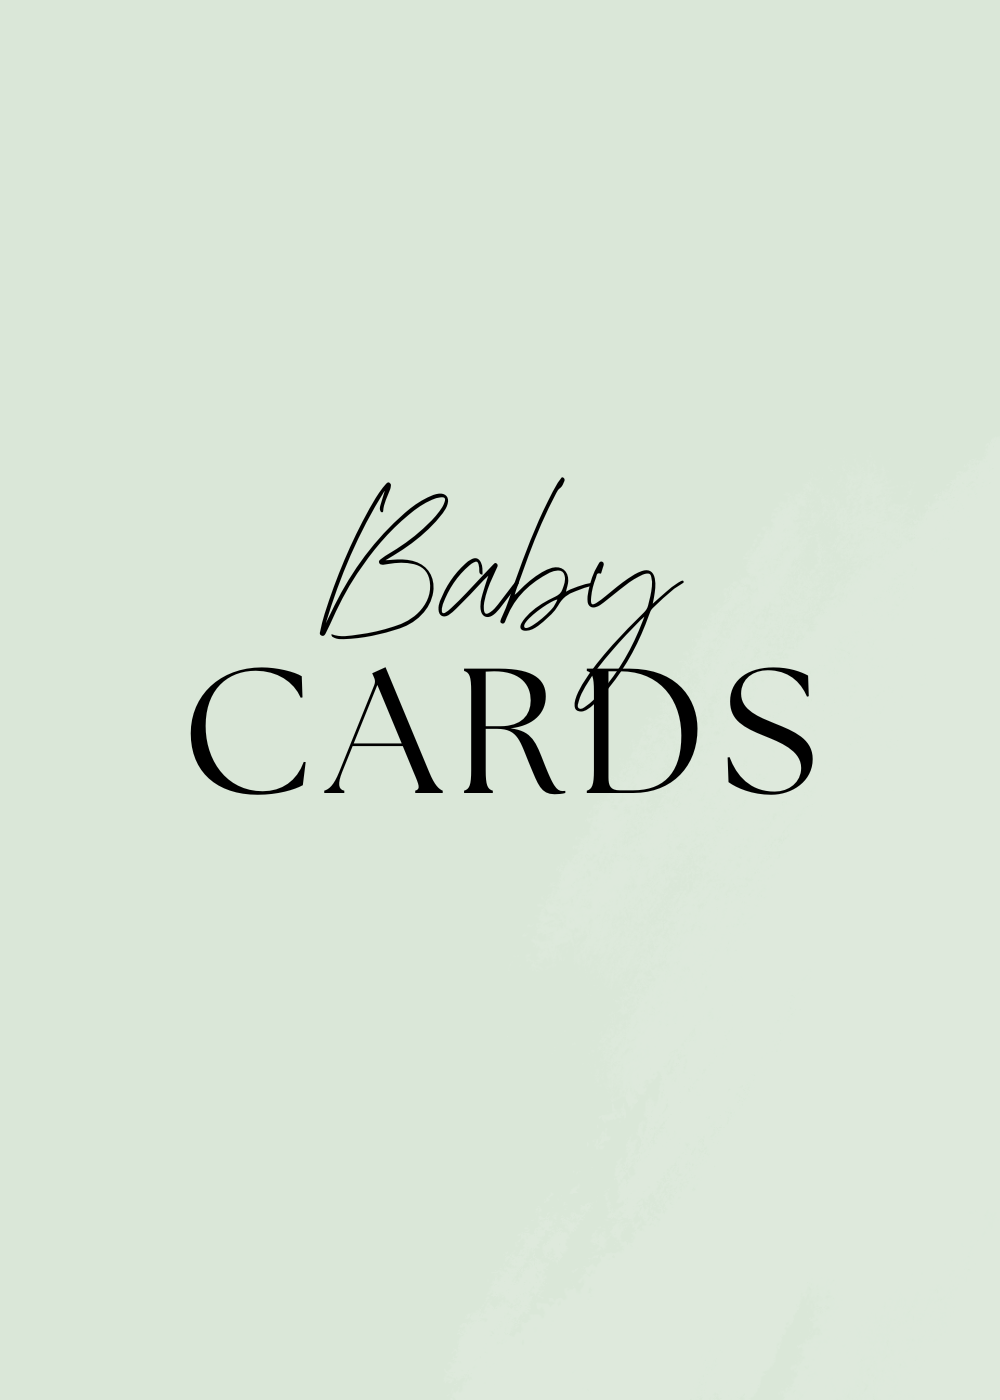 All Baby Cards